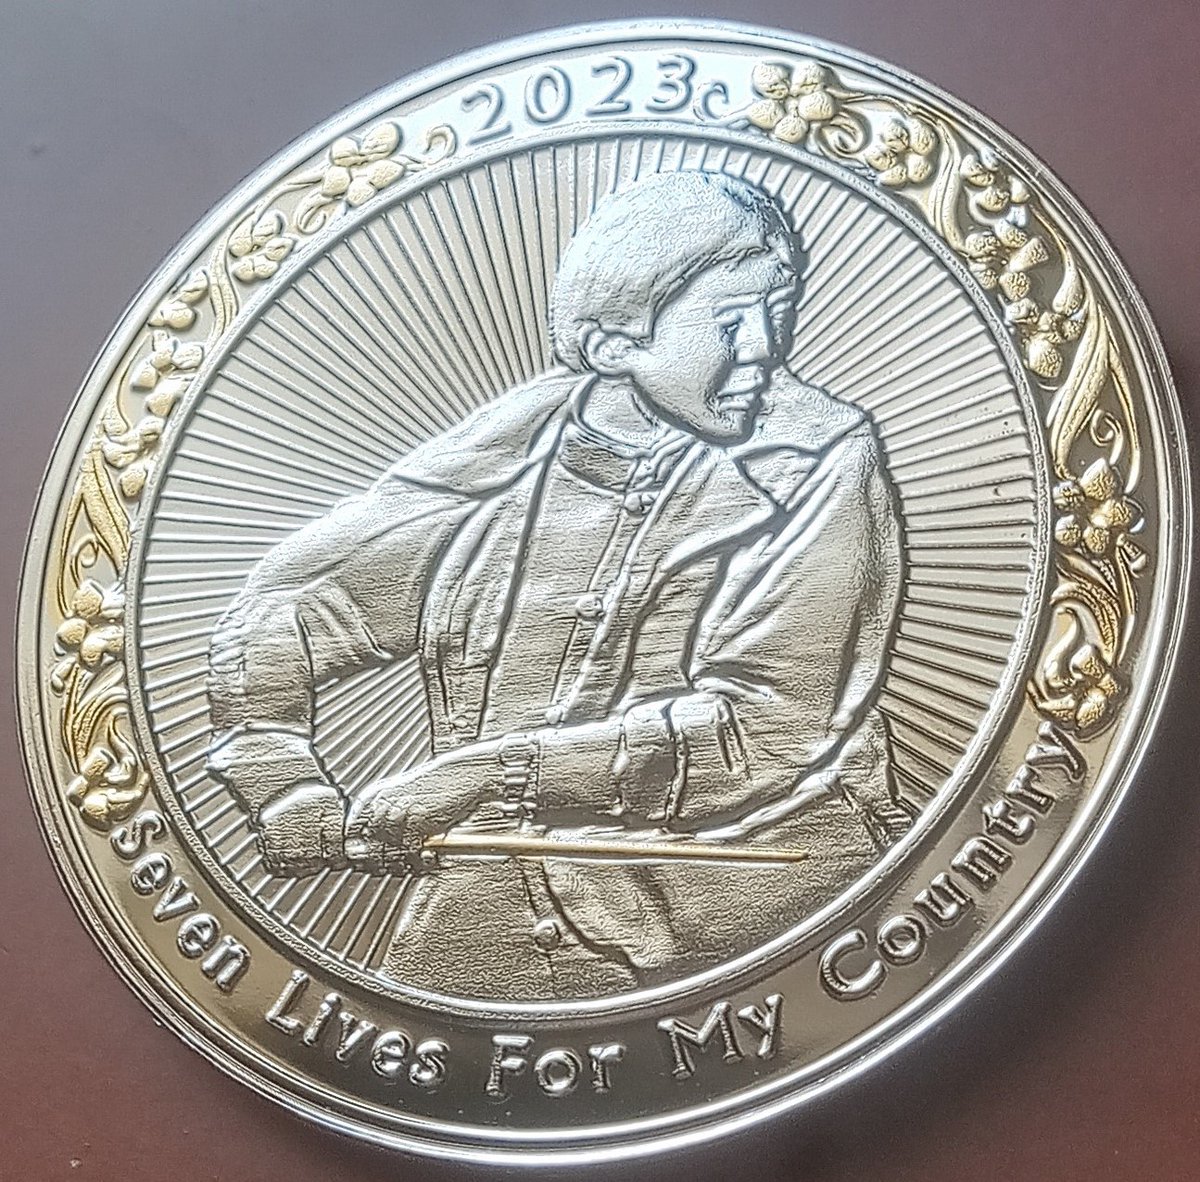 Now until saturday we are running a small fathers day sale on the non gilded otoya coins! It's only a few dollars off but we wanted to get them down a bit for you all, Enjoy the weekend and we hope you have a good celebration! #Silver #FathersDay bfacllc.com/shop.html